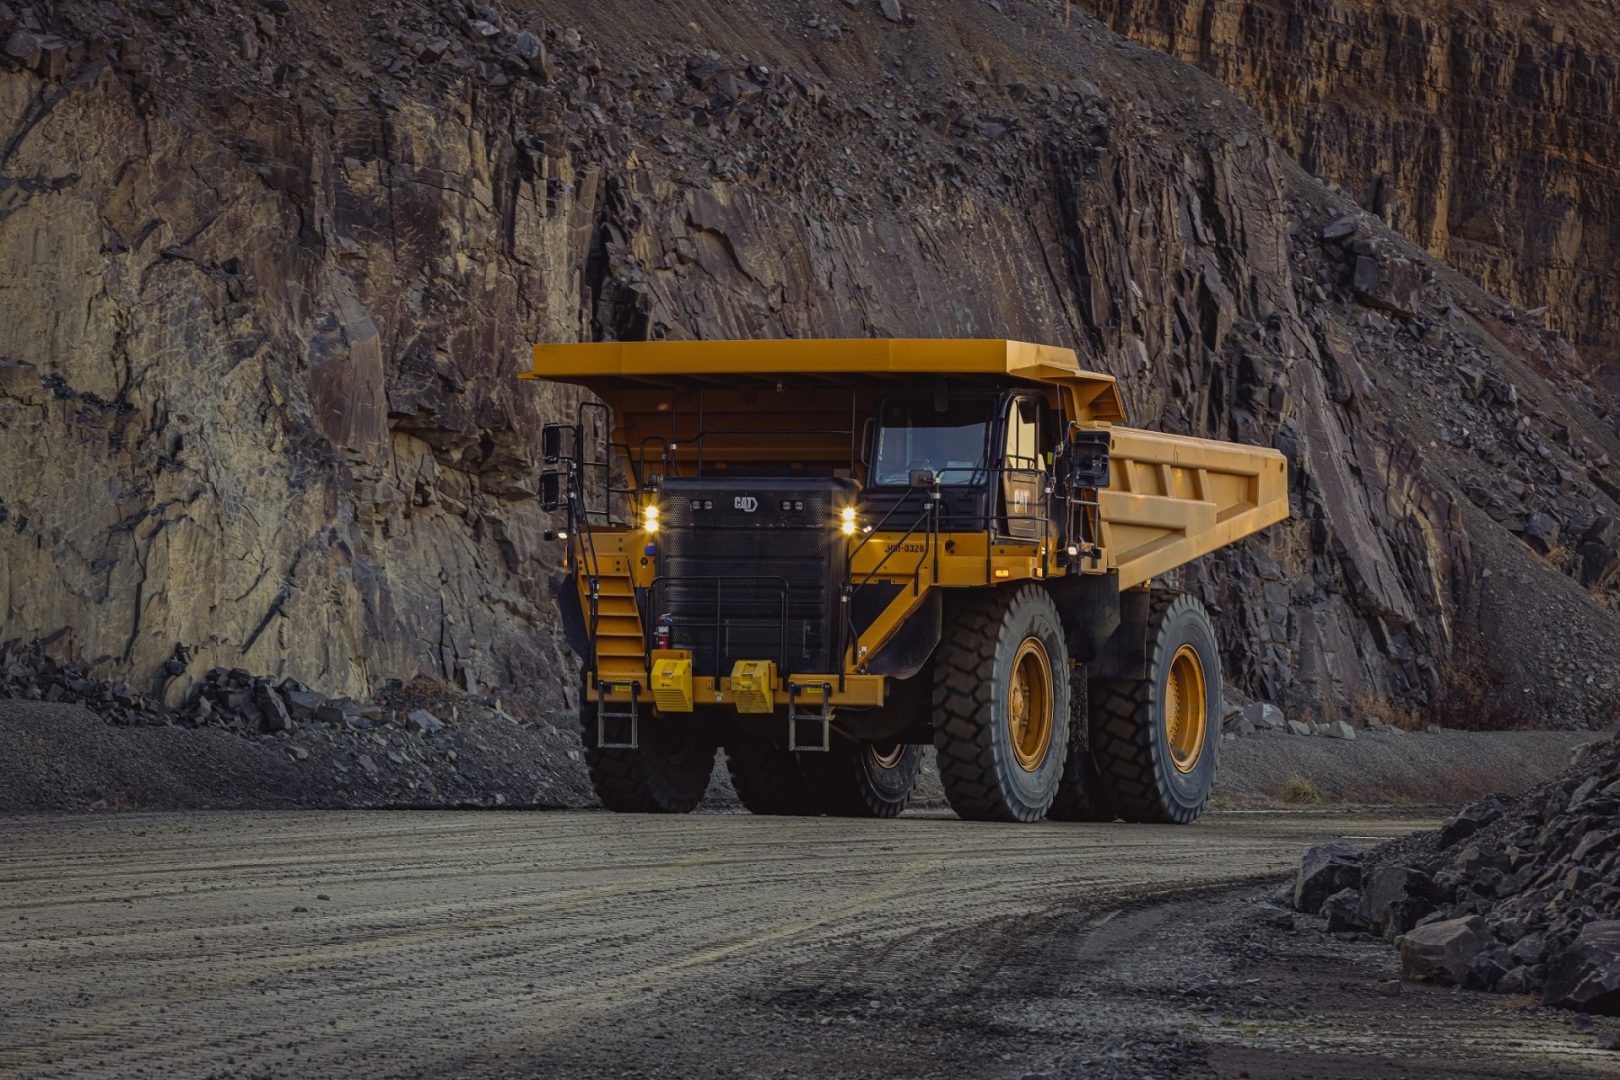 Caterpillar autonomous solutions to be deployed in aggregates industry